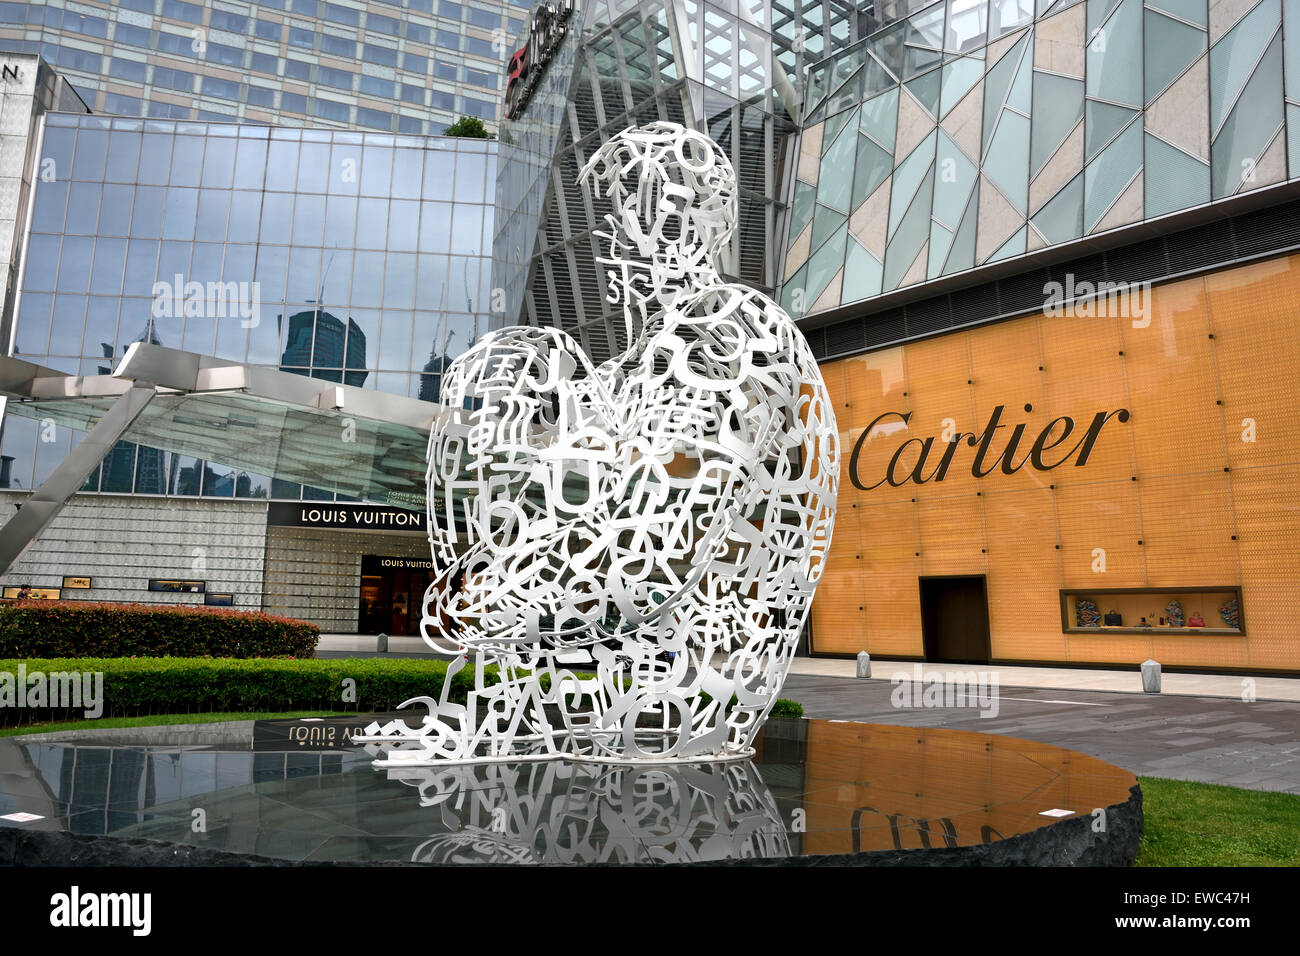 Cartier High Resolution Stock Photography and Images - Alamy